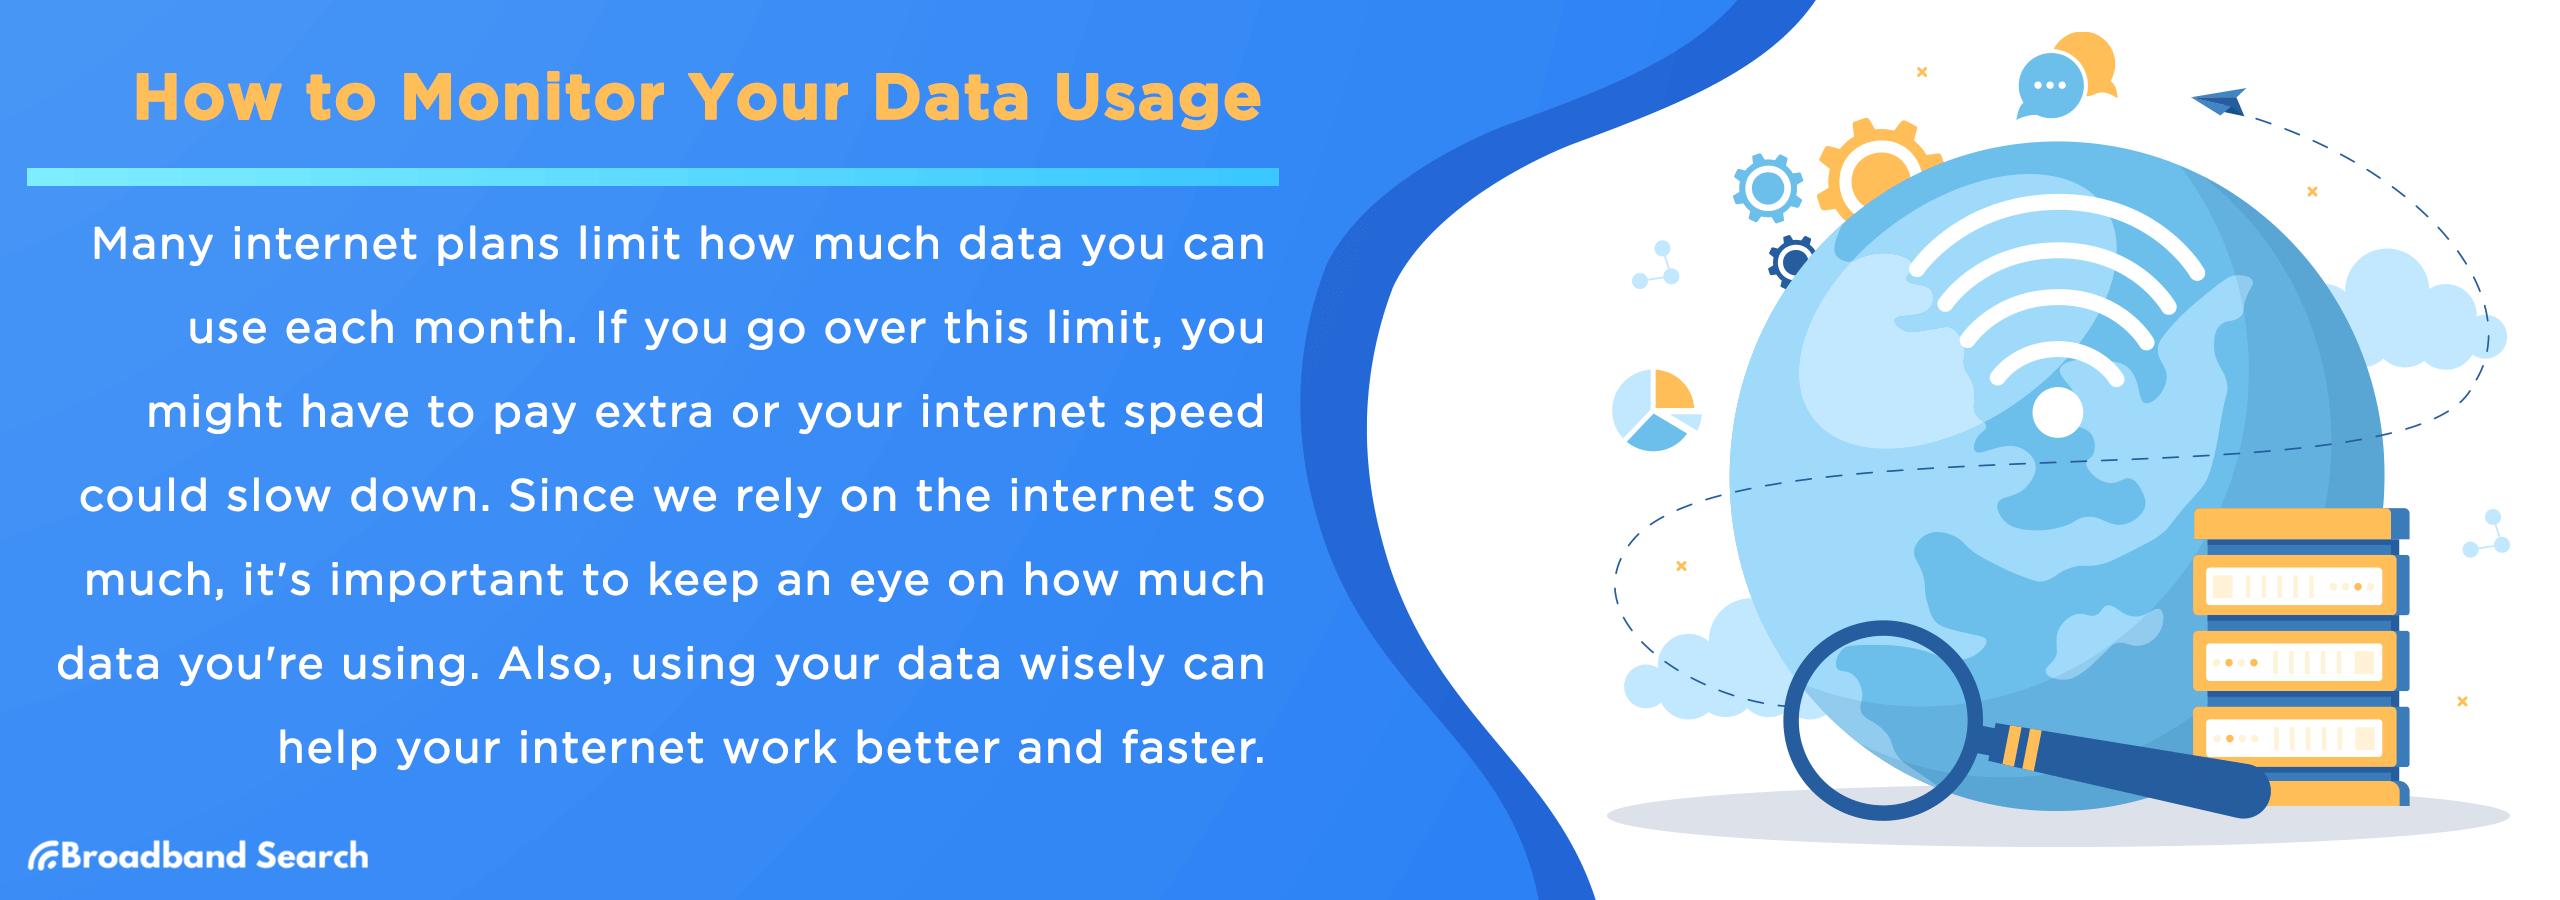 How to Monitor Your Data Usage